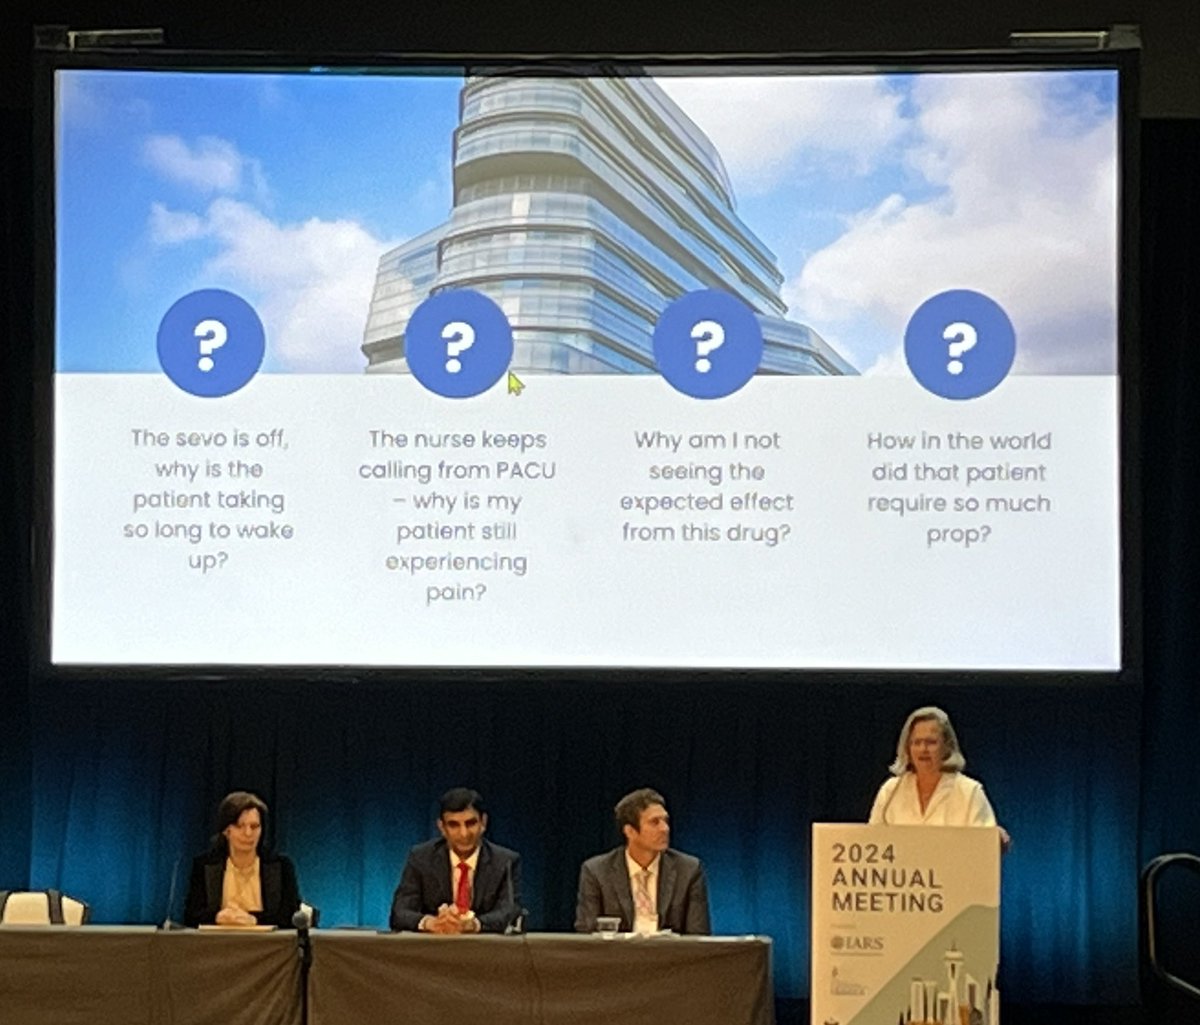 Enjoying a FAER grantee power panel at #IARS24 with @SSadhasivamMD, @VeselaKovachev2, @Douville_NJ, and Ruth Waterman presenting Genomics and Personalized Medicine in the Perioperative Period.